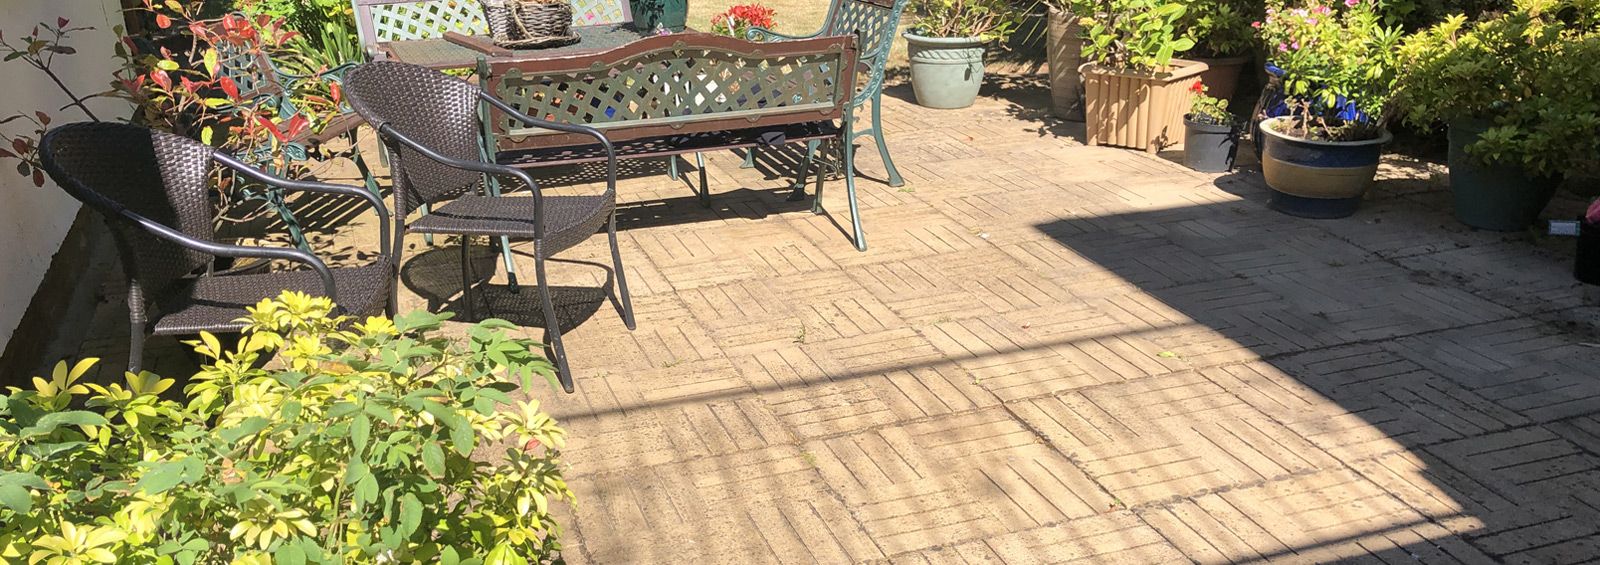 professional patio cleaner conwy